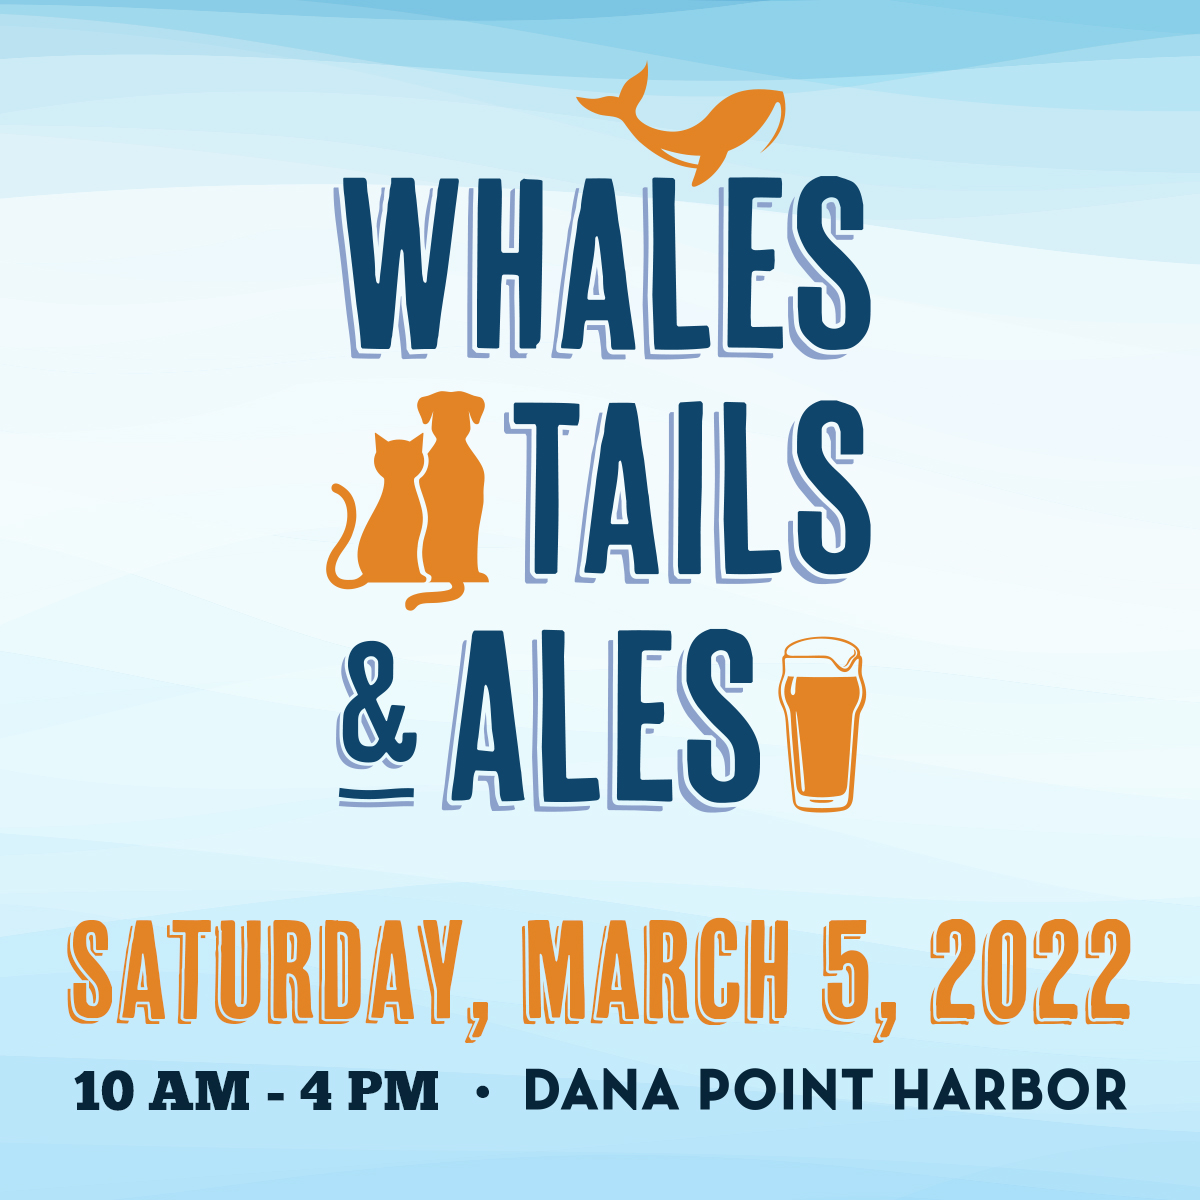 Whales, Tails, and Ales Graphic